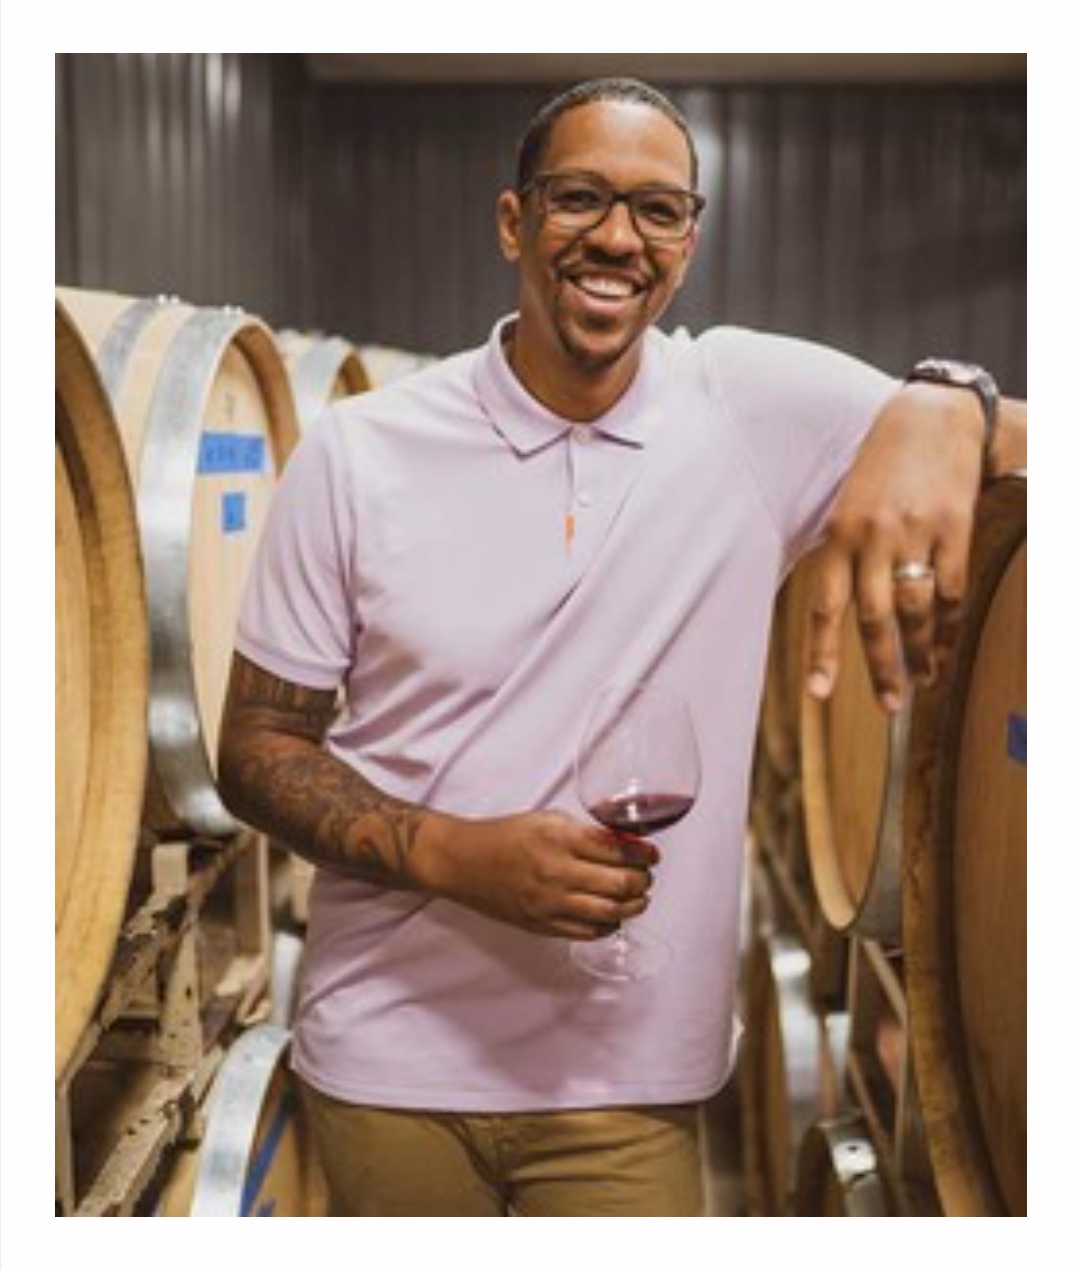 Channing Frye, Owner of Chosen Family Wines